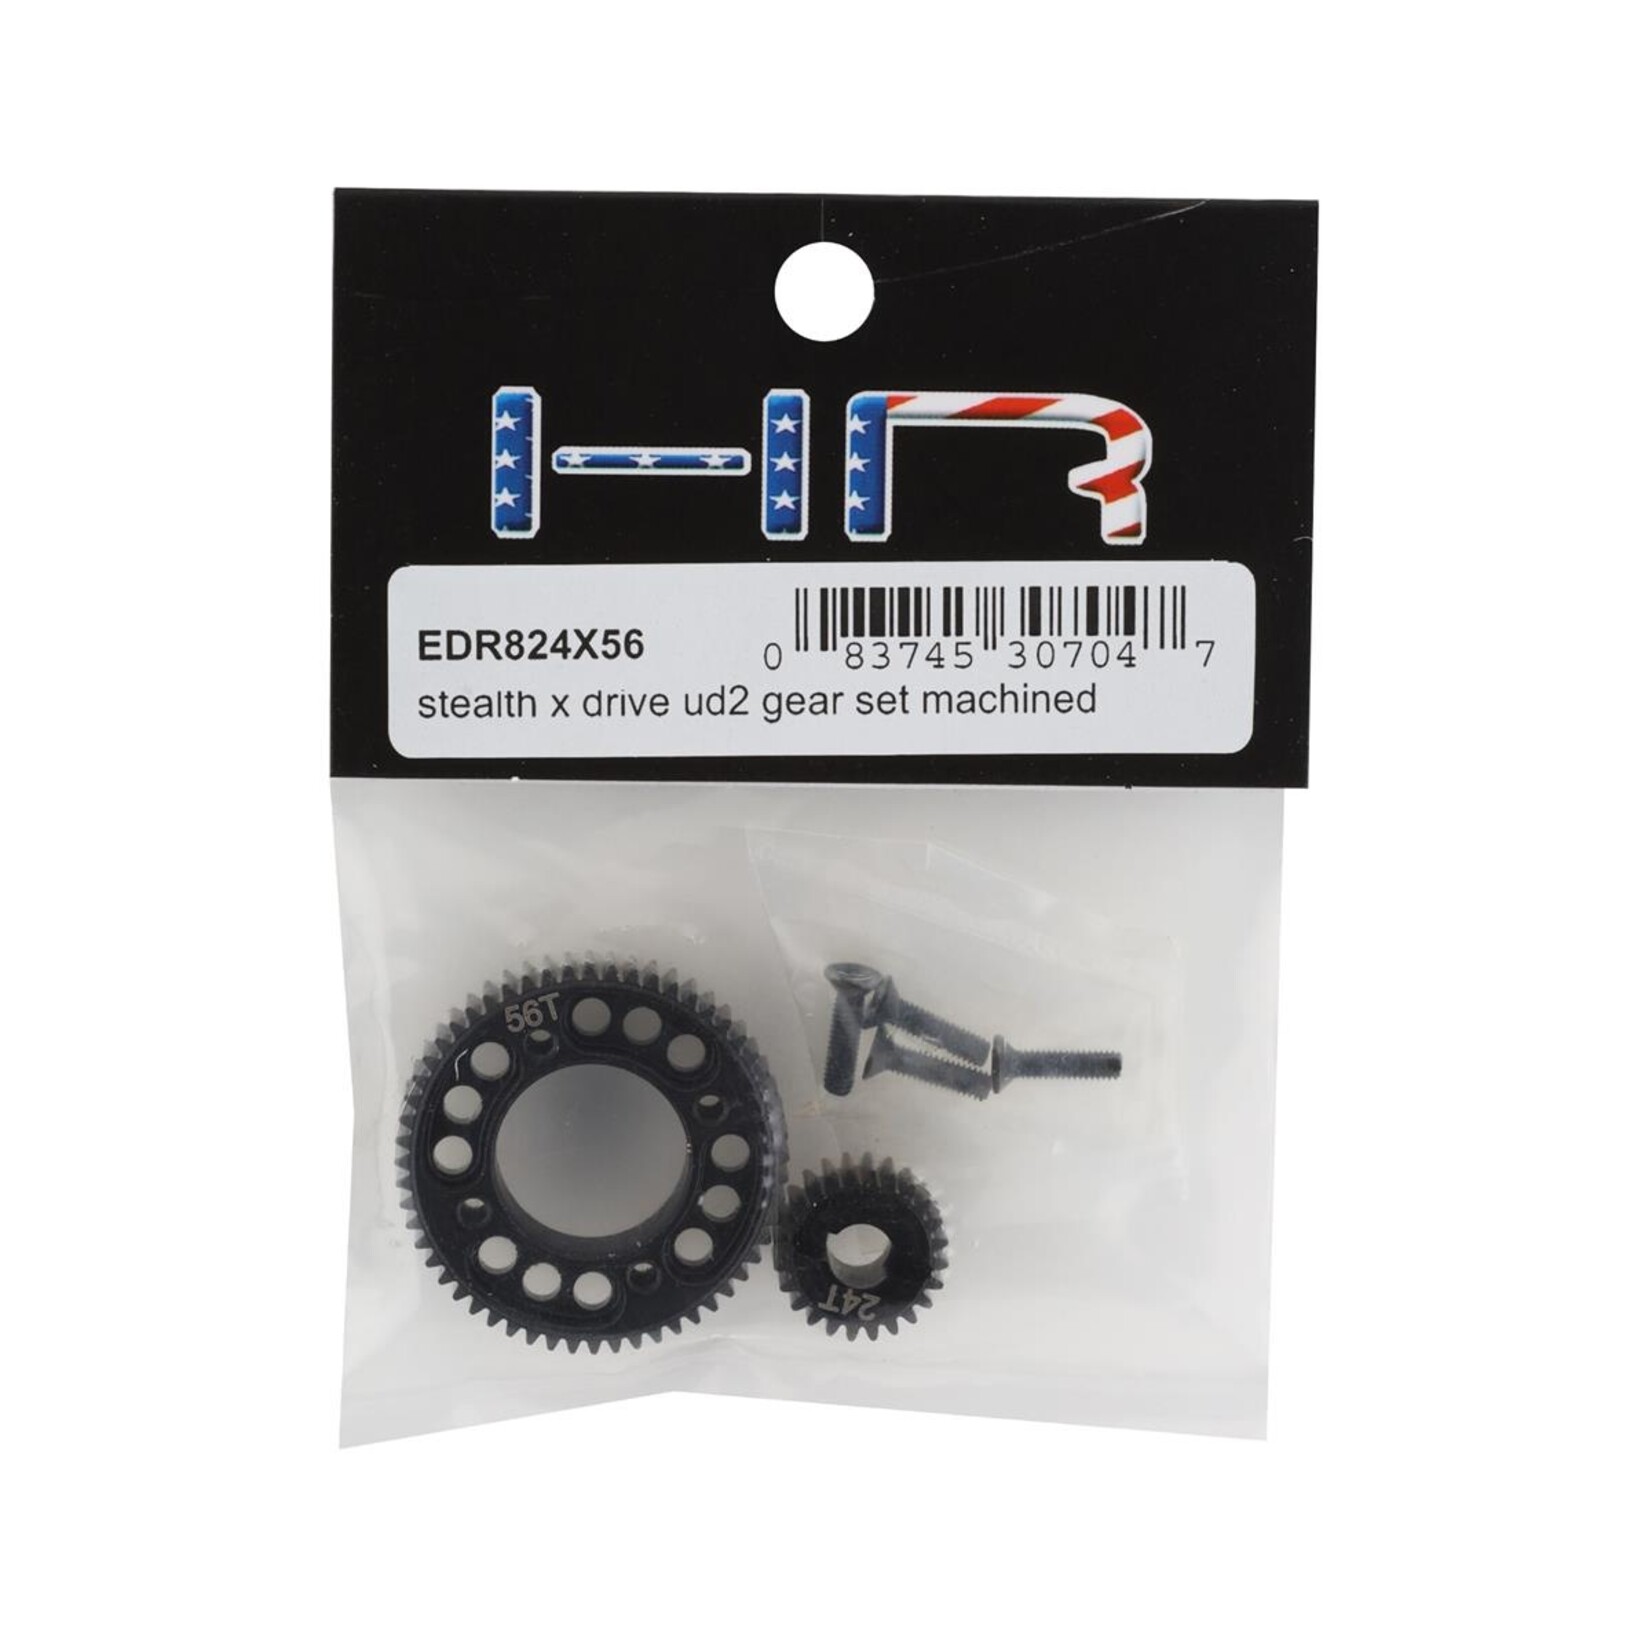 Hot Racing Hot Racing Enduro Stealth X UD2 Machined Underdrive Gear Set #EDR824X56